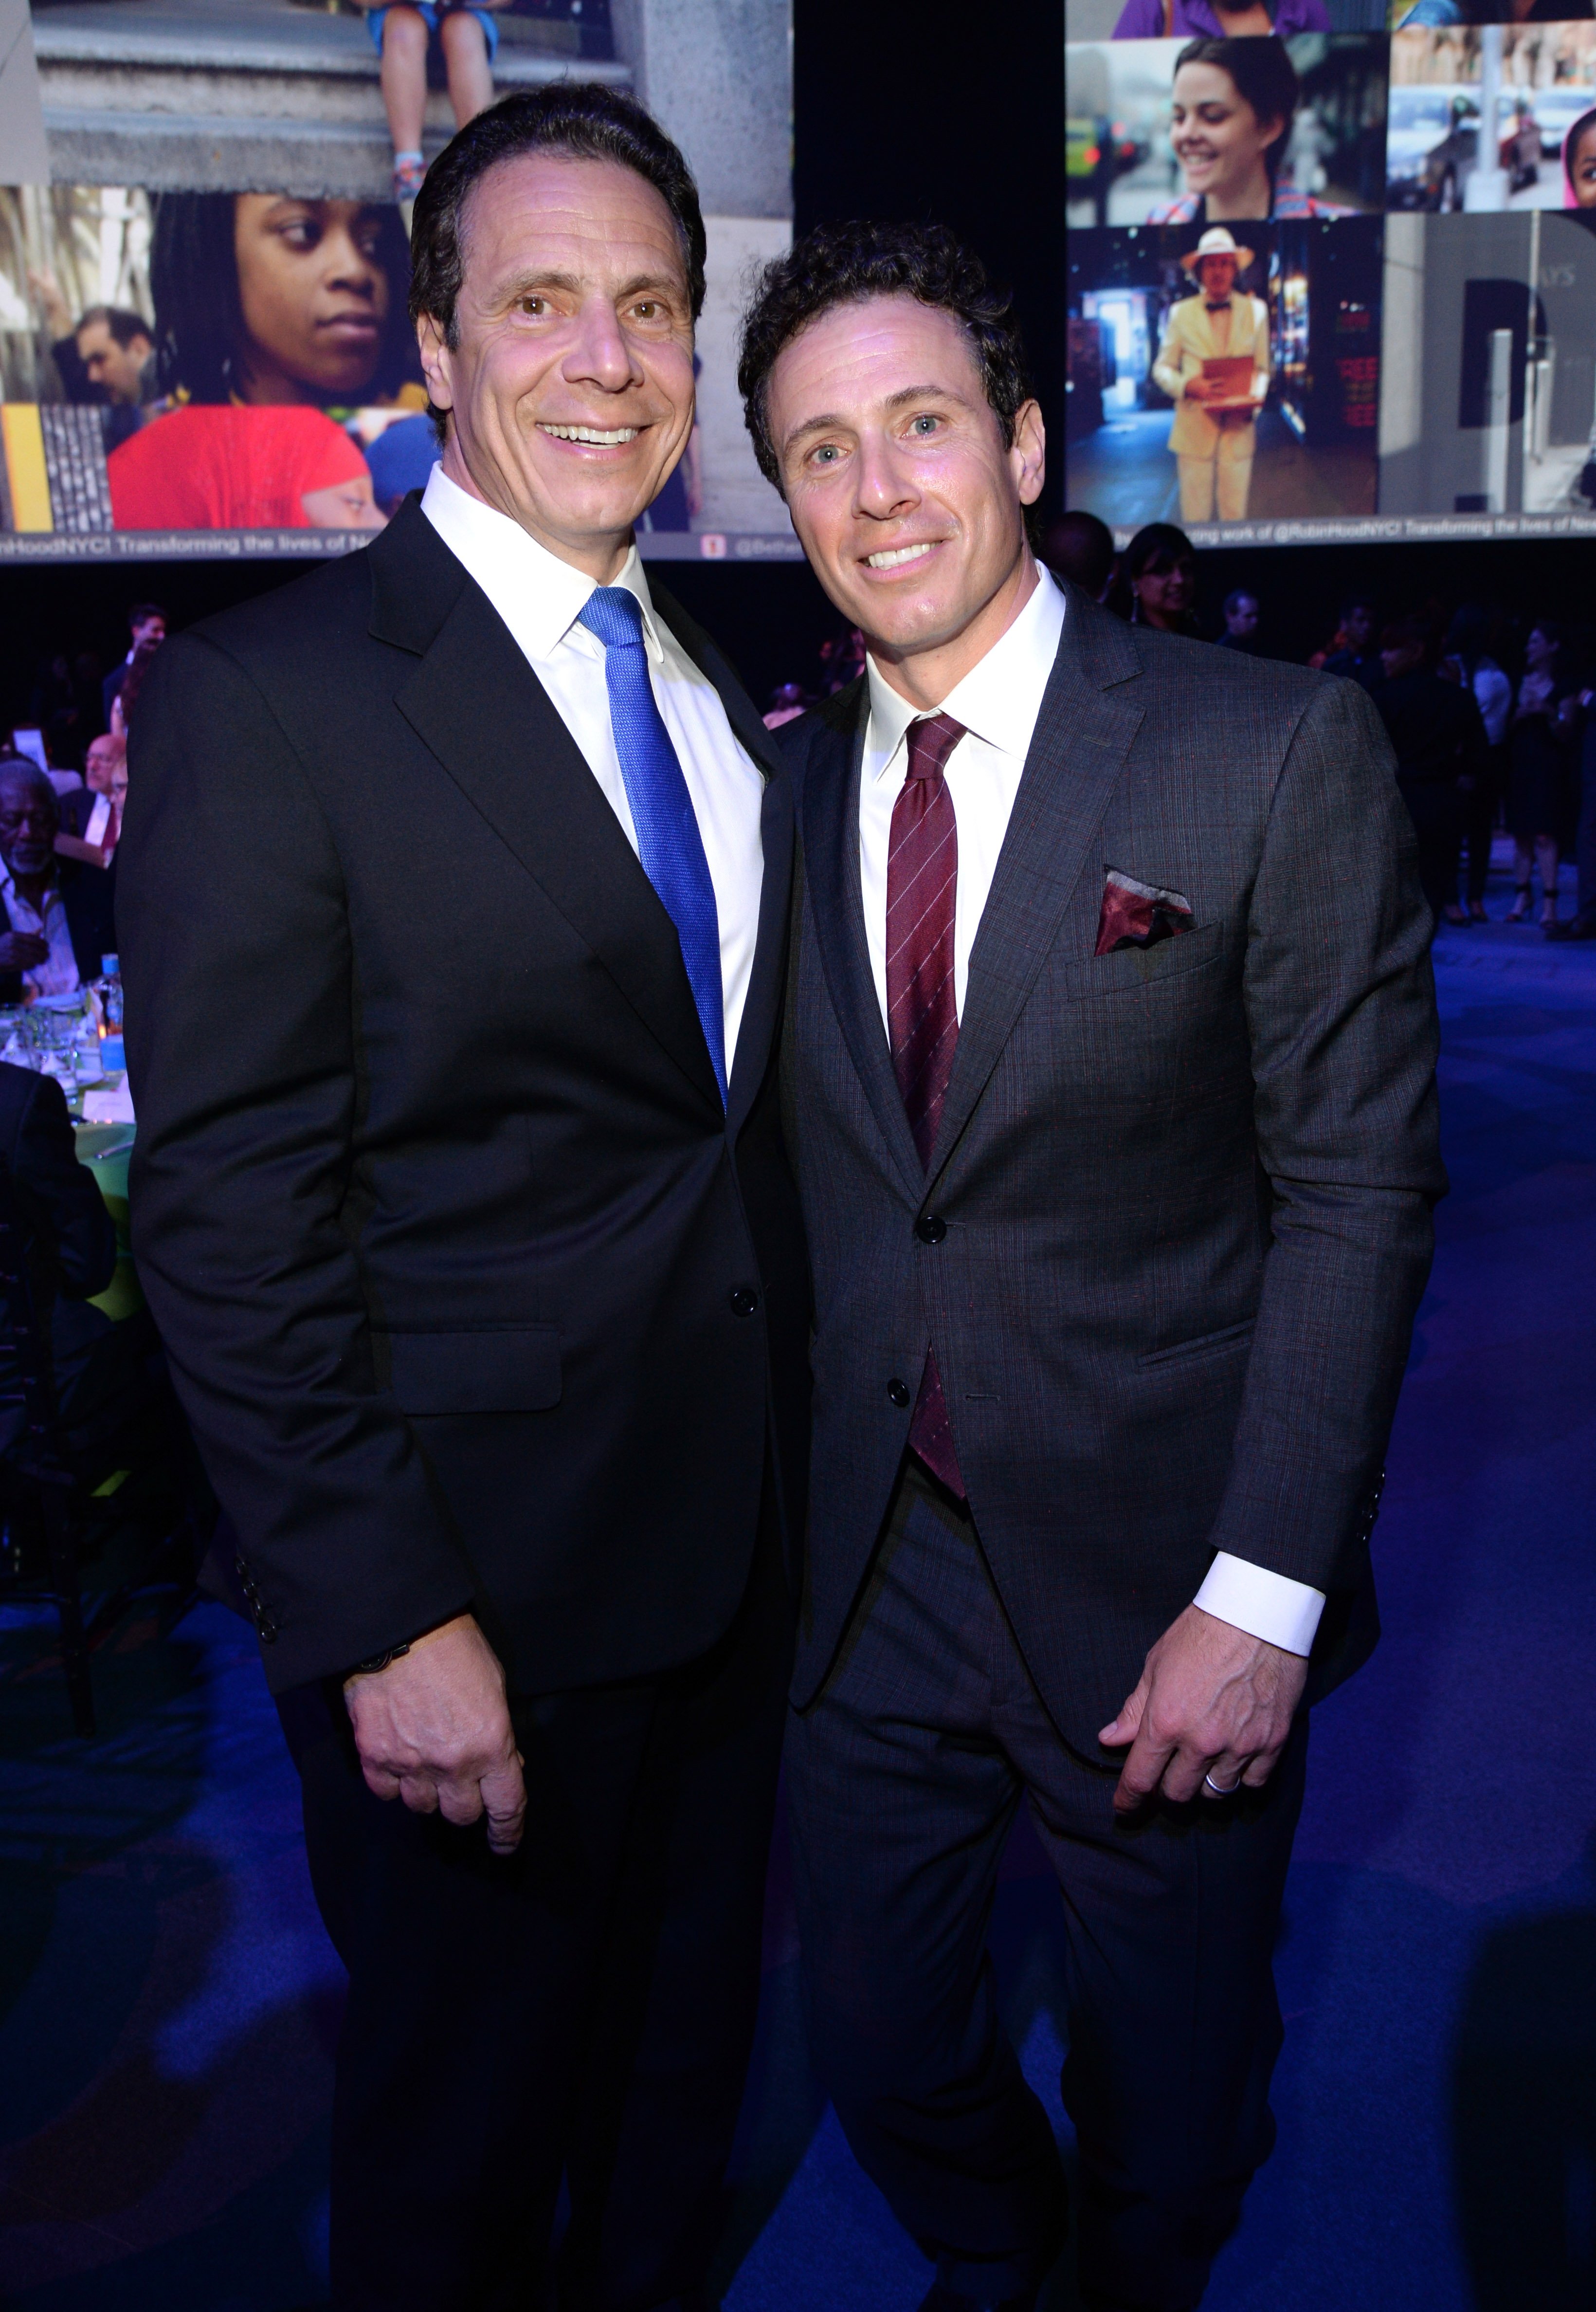 New York Governor Andrew Cuomo and Chris Cuomo attend The Robin Hood Foundation's 2015 Benefit on May 12, 2015. | Photo: Getty Images